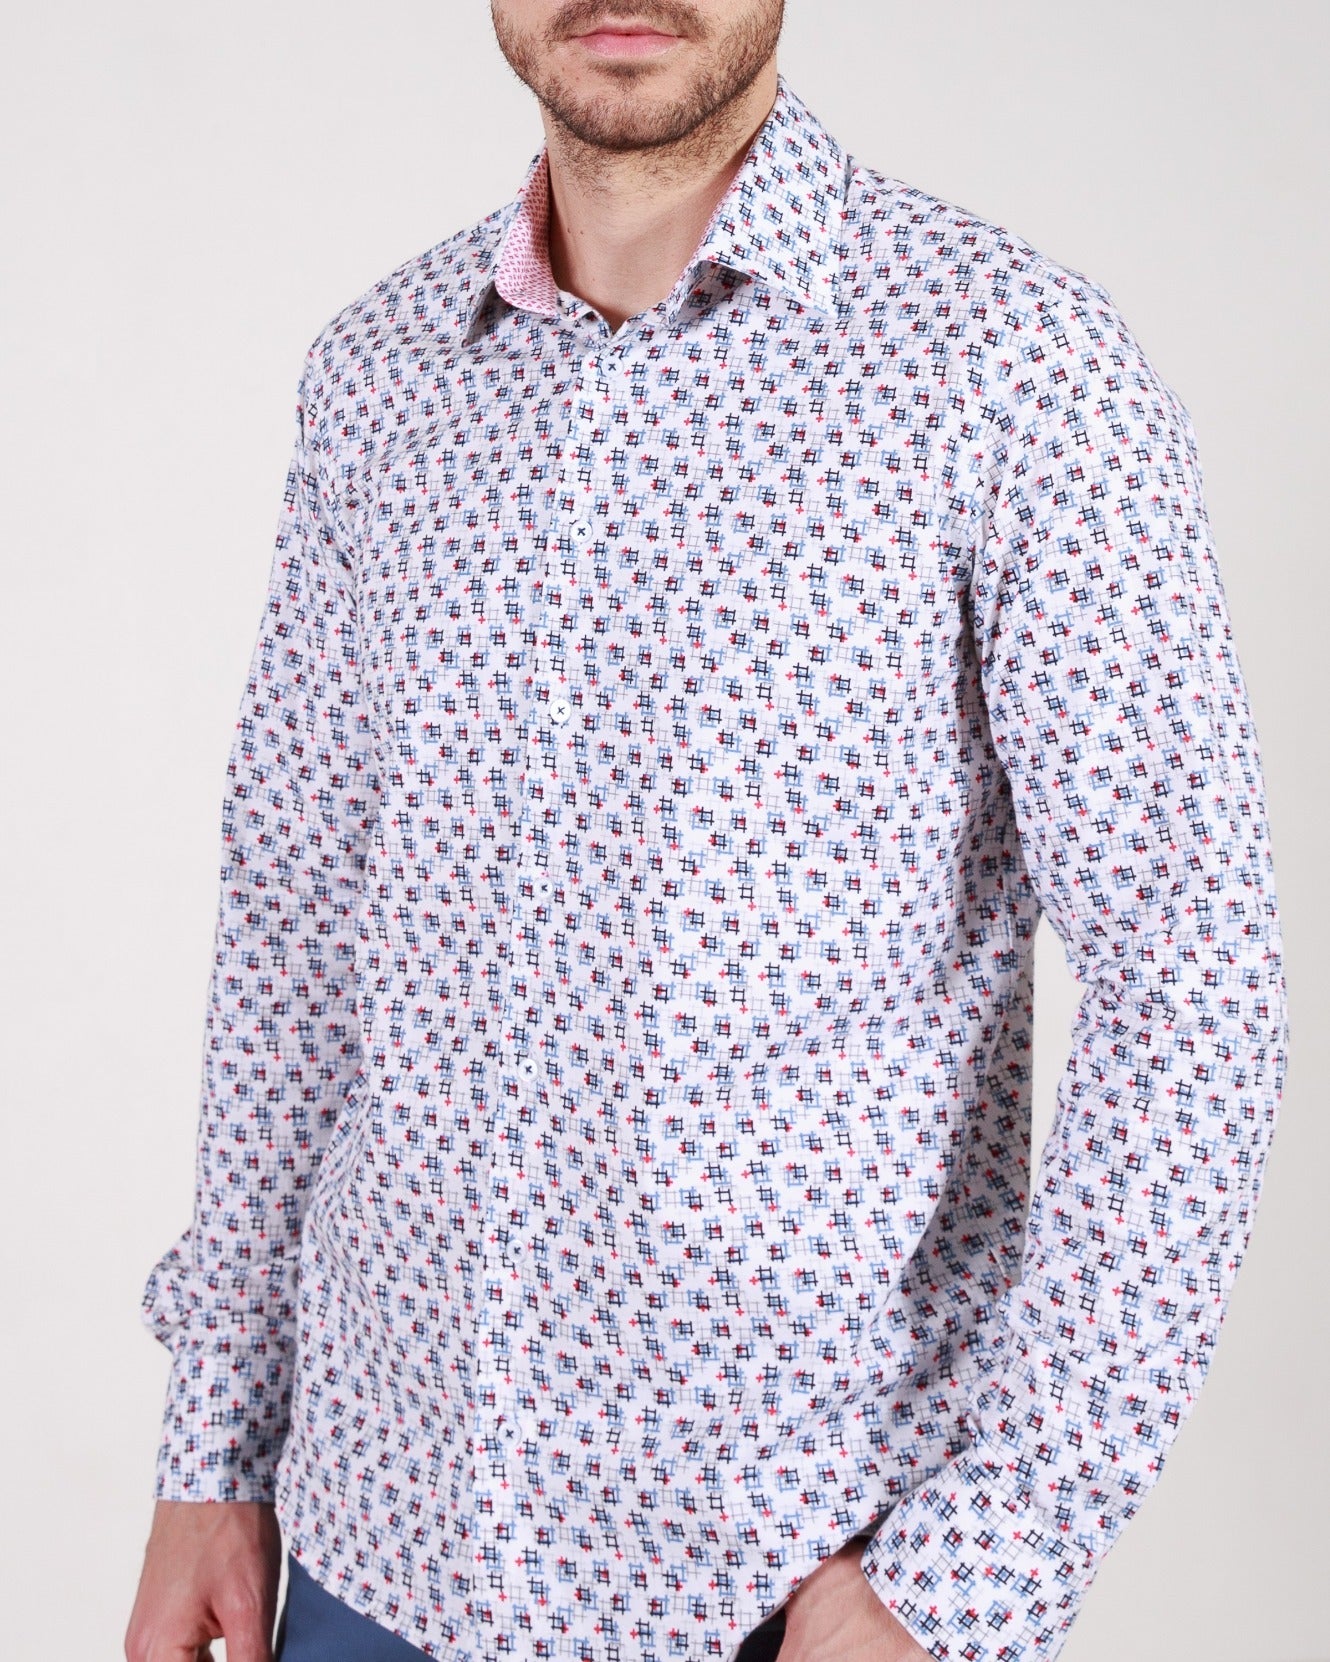 Abstract Geometric Printed White Long Sleeve Cotton Shirt